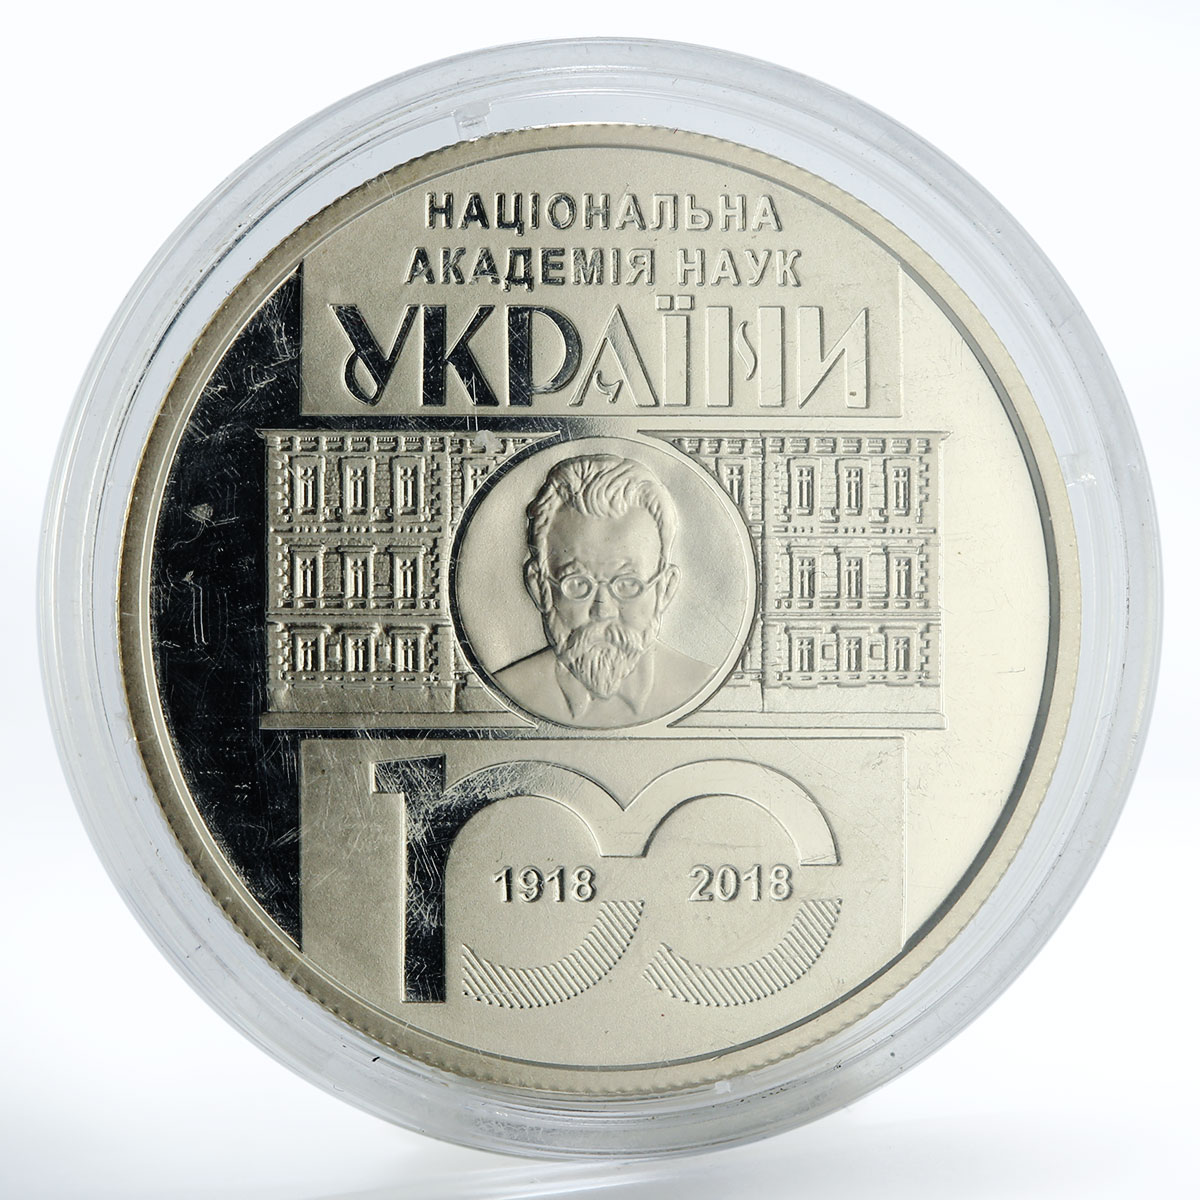 Ukraine 5 hryvnias 100th of National Academy of Sciences nickel coin 2018